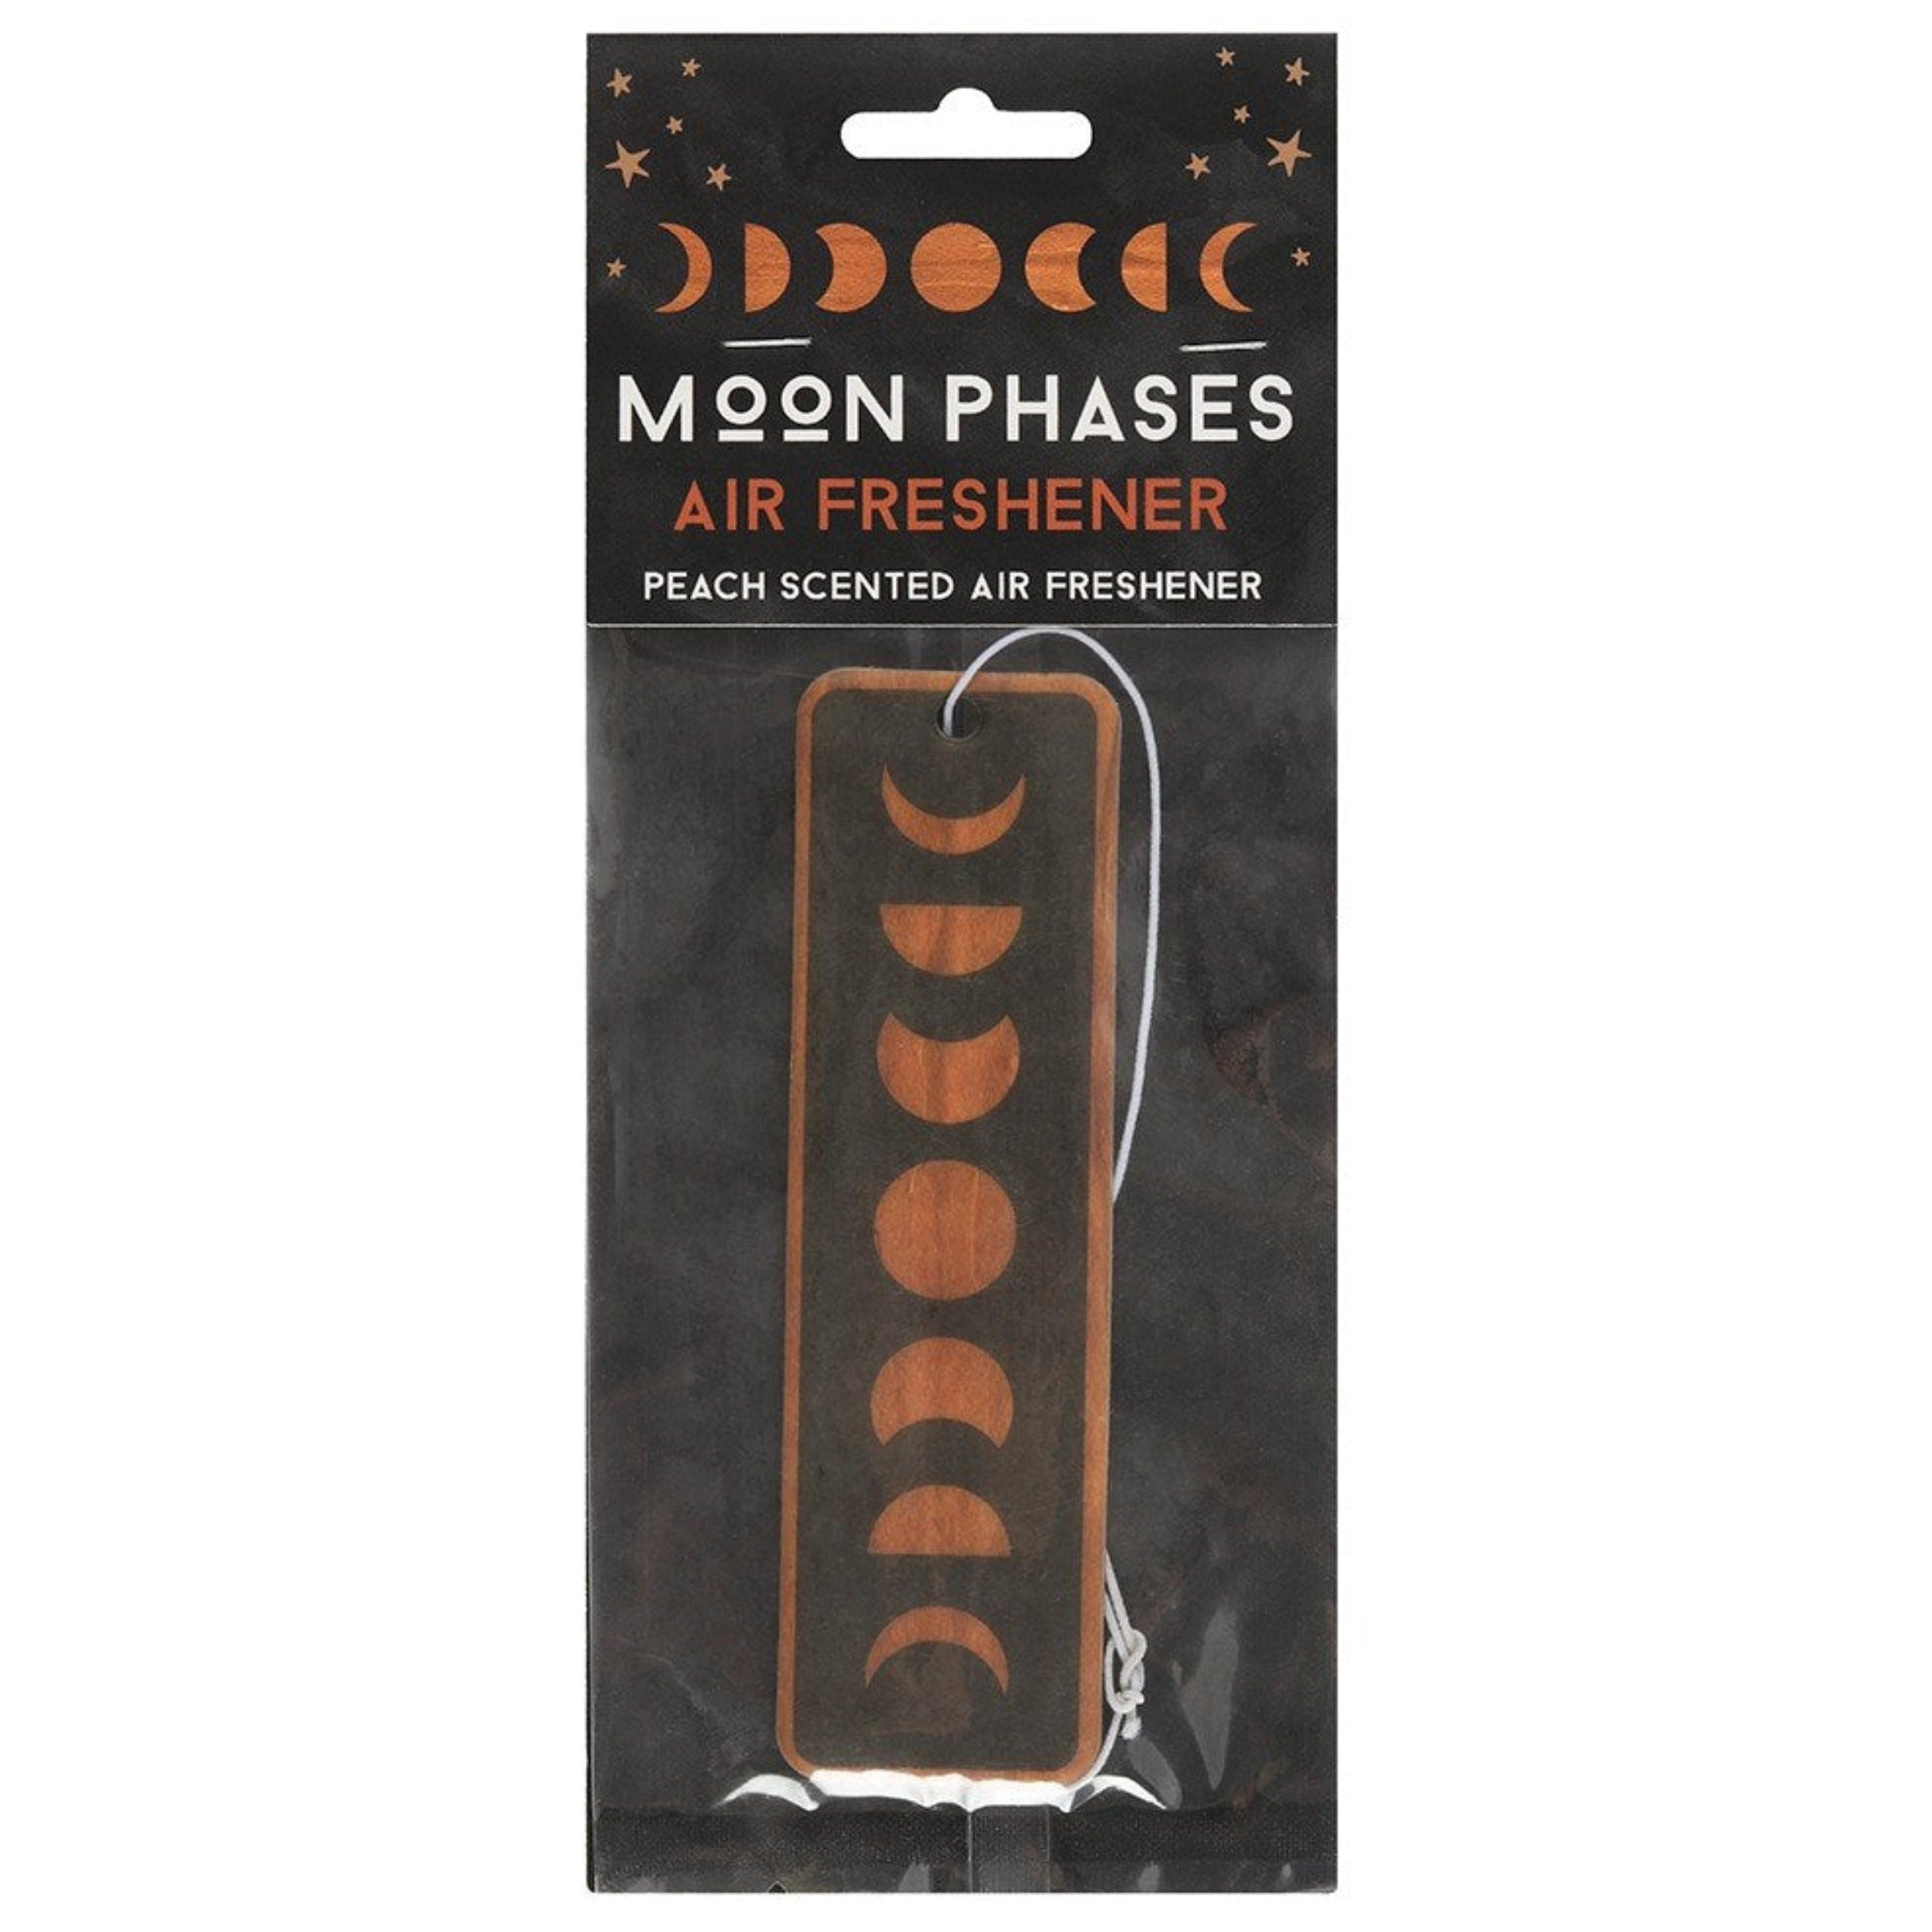 Moon Phase Air Freshener- Peach Scented Besom Boutique